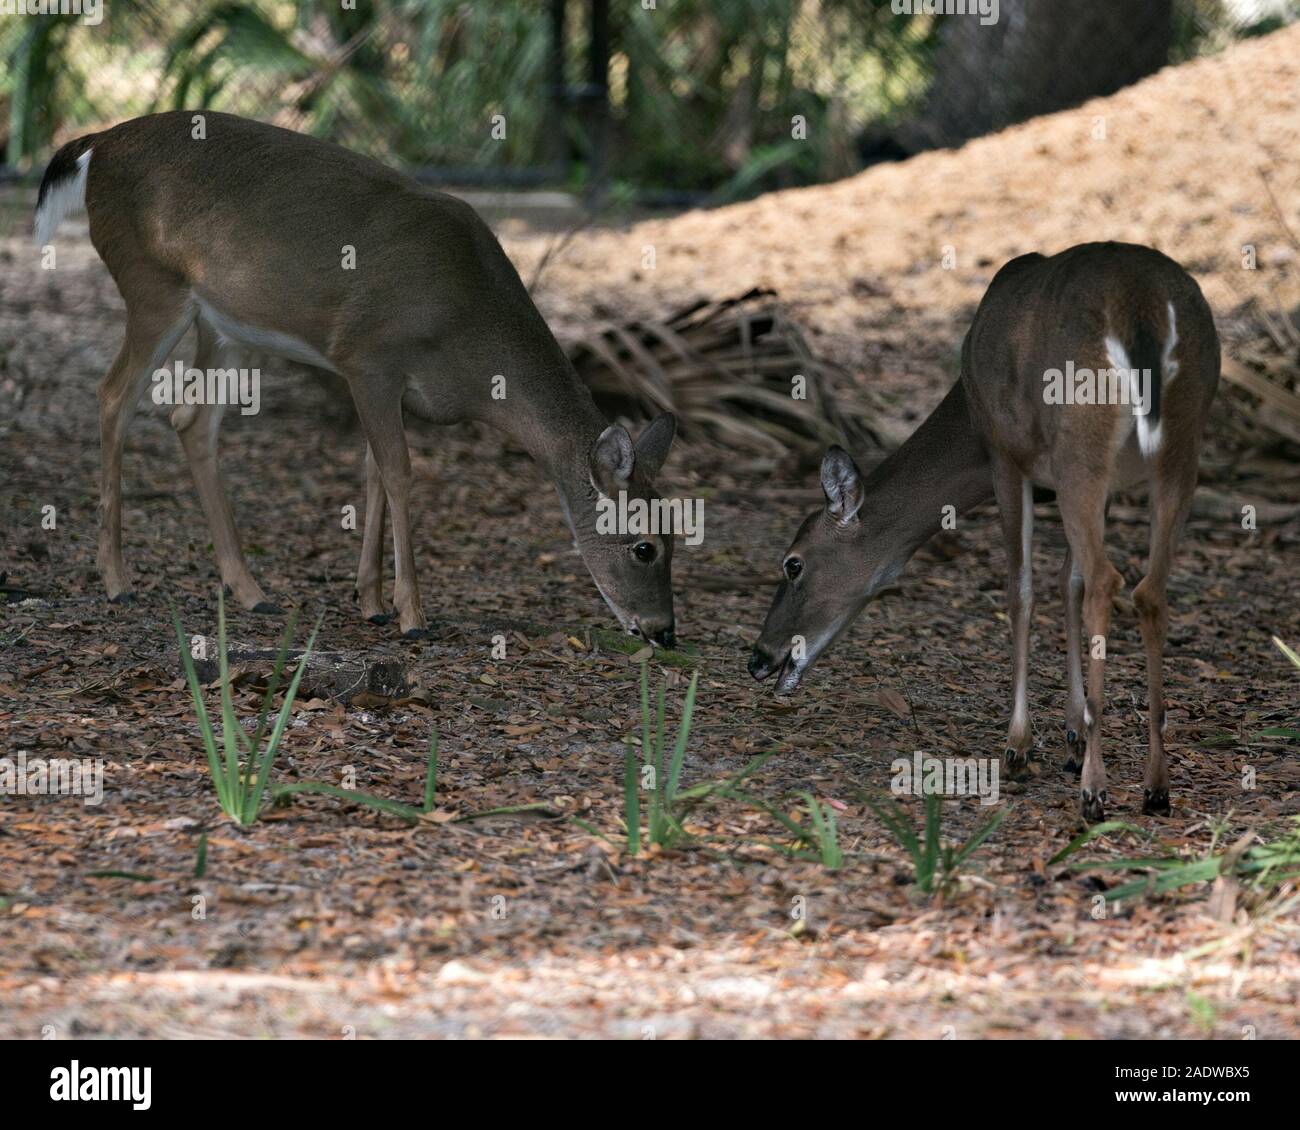 Deer animal couple in their environment and surrounding with a foliage background . Stock Photo